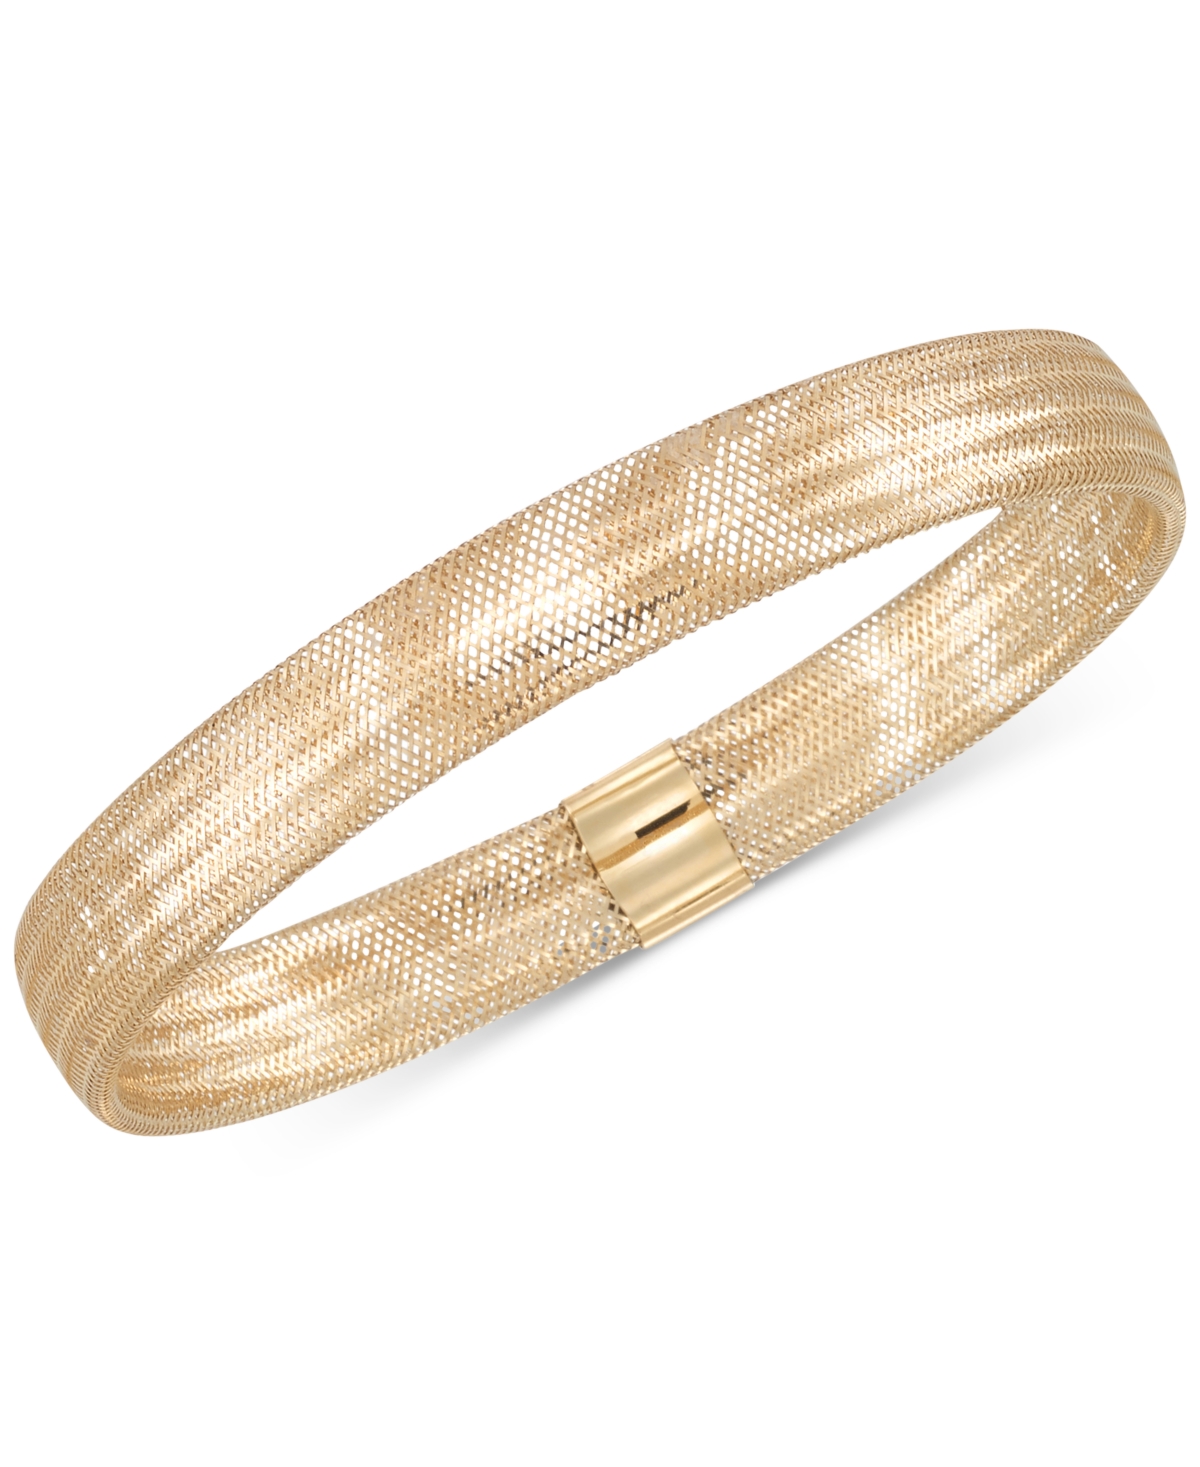 Italian Gold Stretch Bangle Bracelet in 14k Yellow, White or Rose Gold, Made in Italy